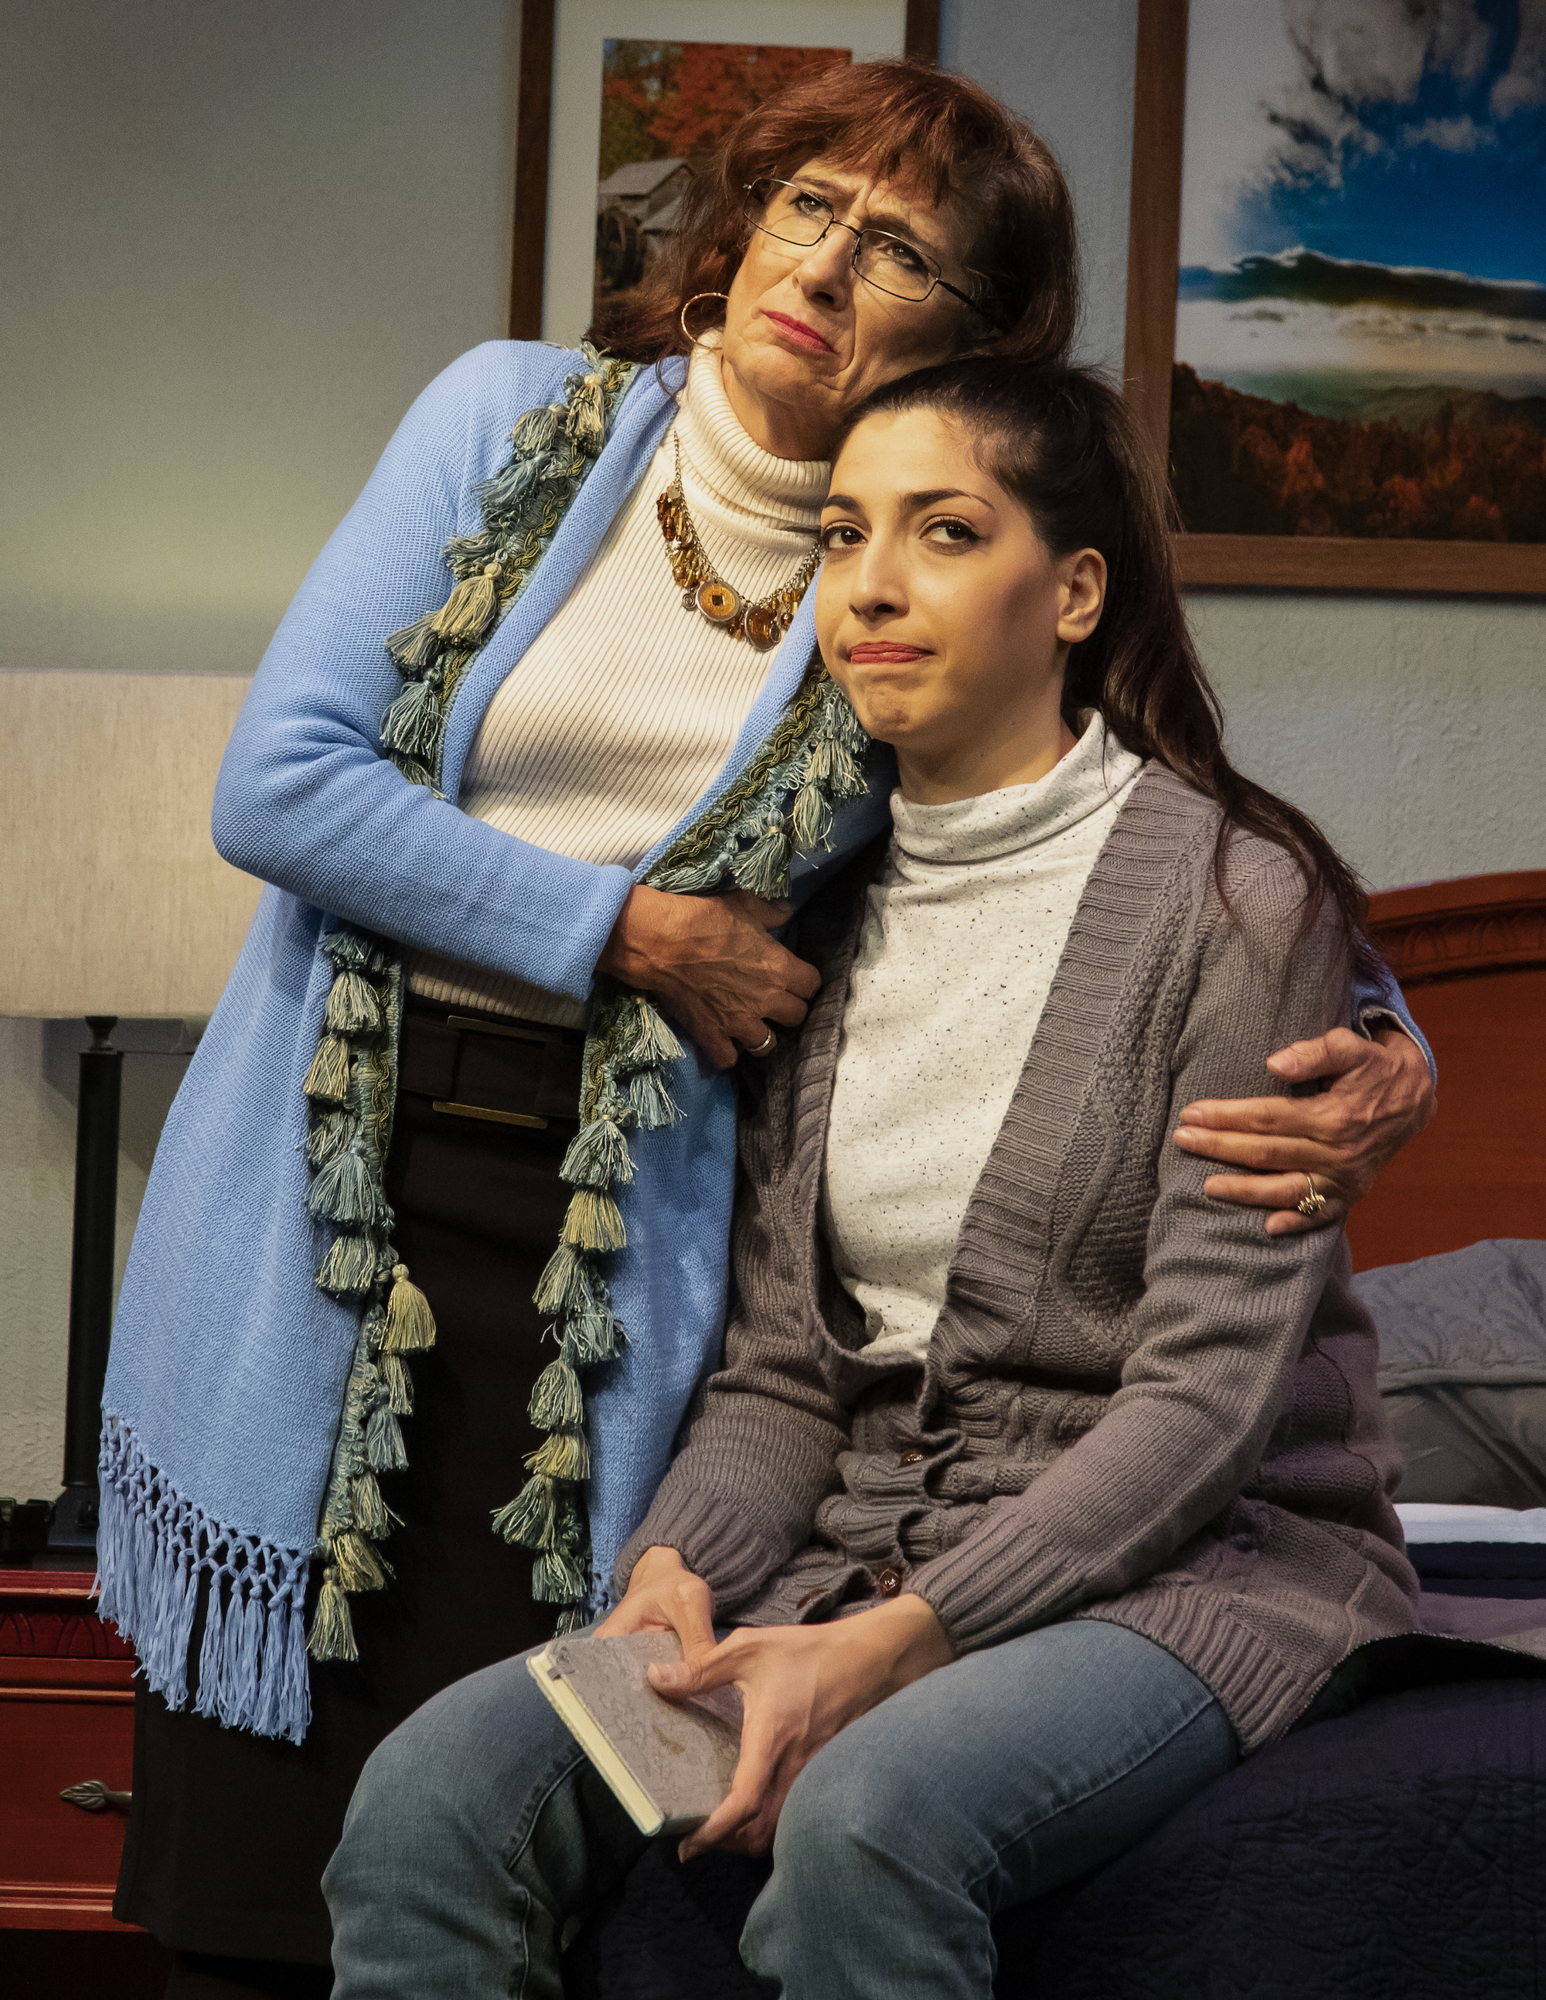 Ayelet (Anat Cogan) and Edna (Marina Re) spend a little granddaughter/grandmother bonding time during an ill-fated road trip.